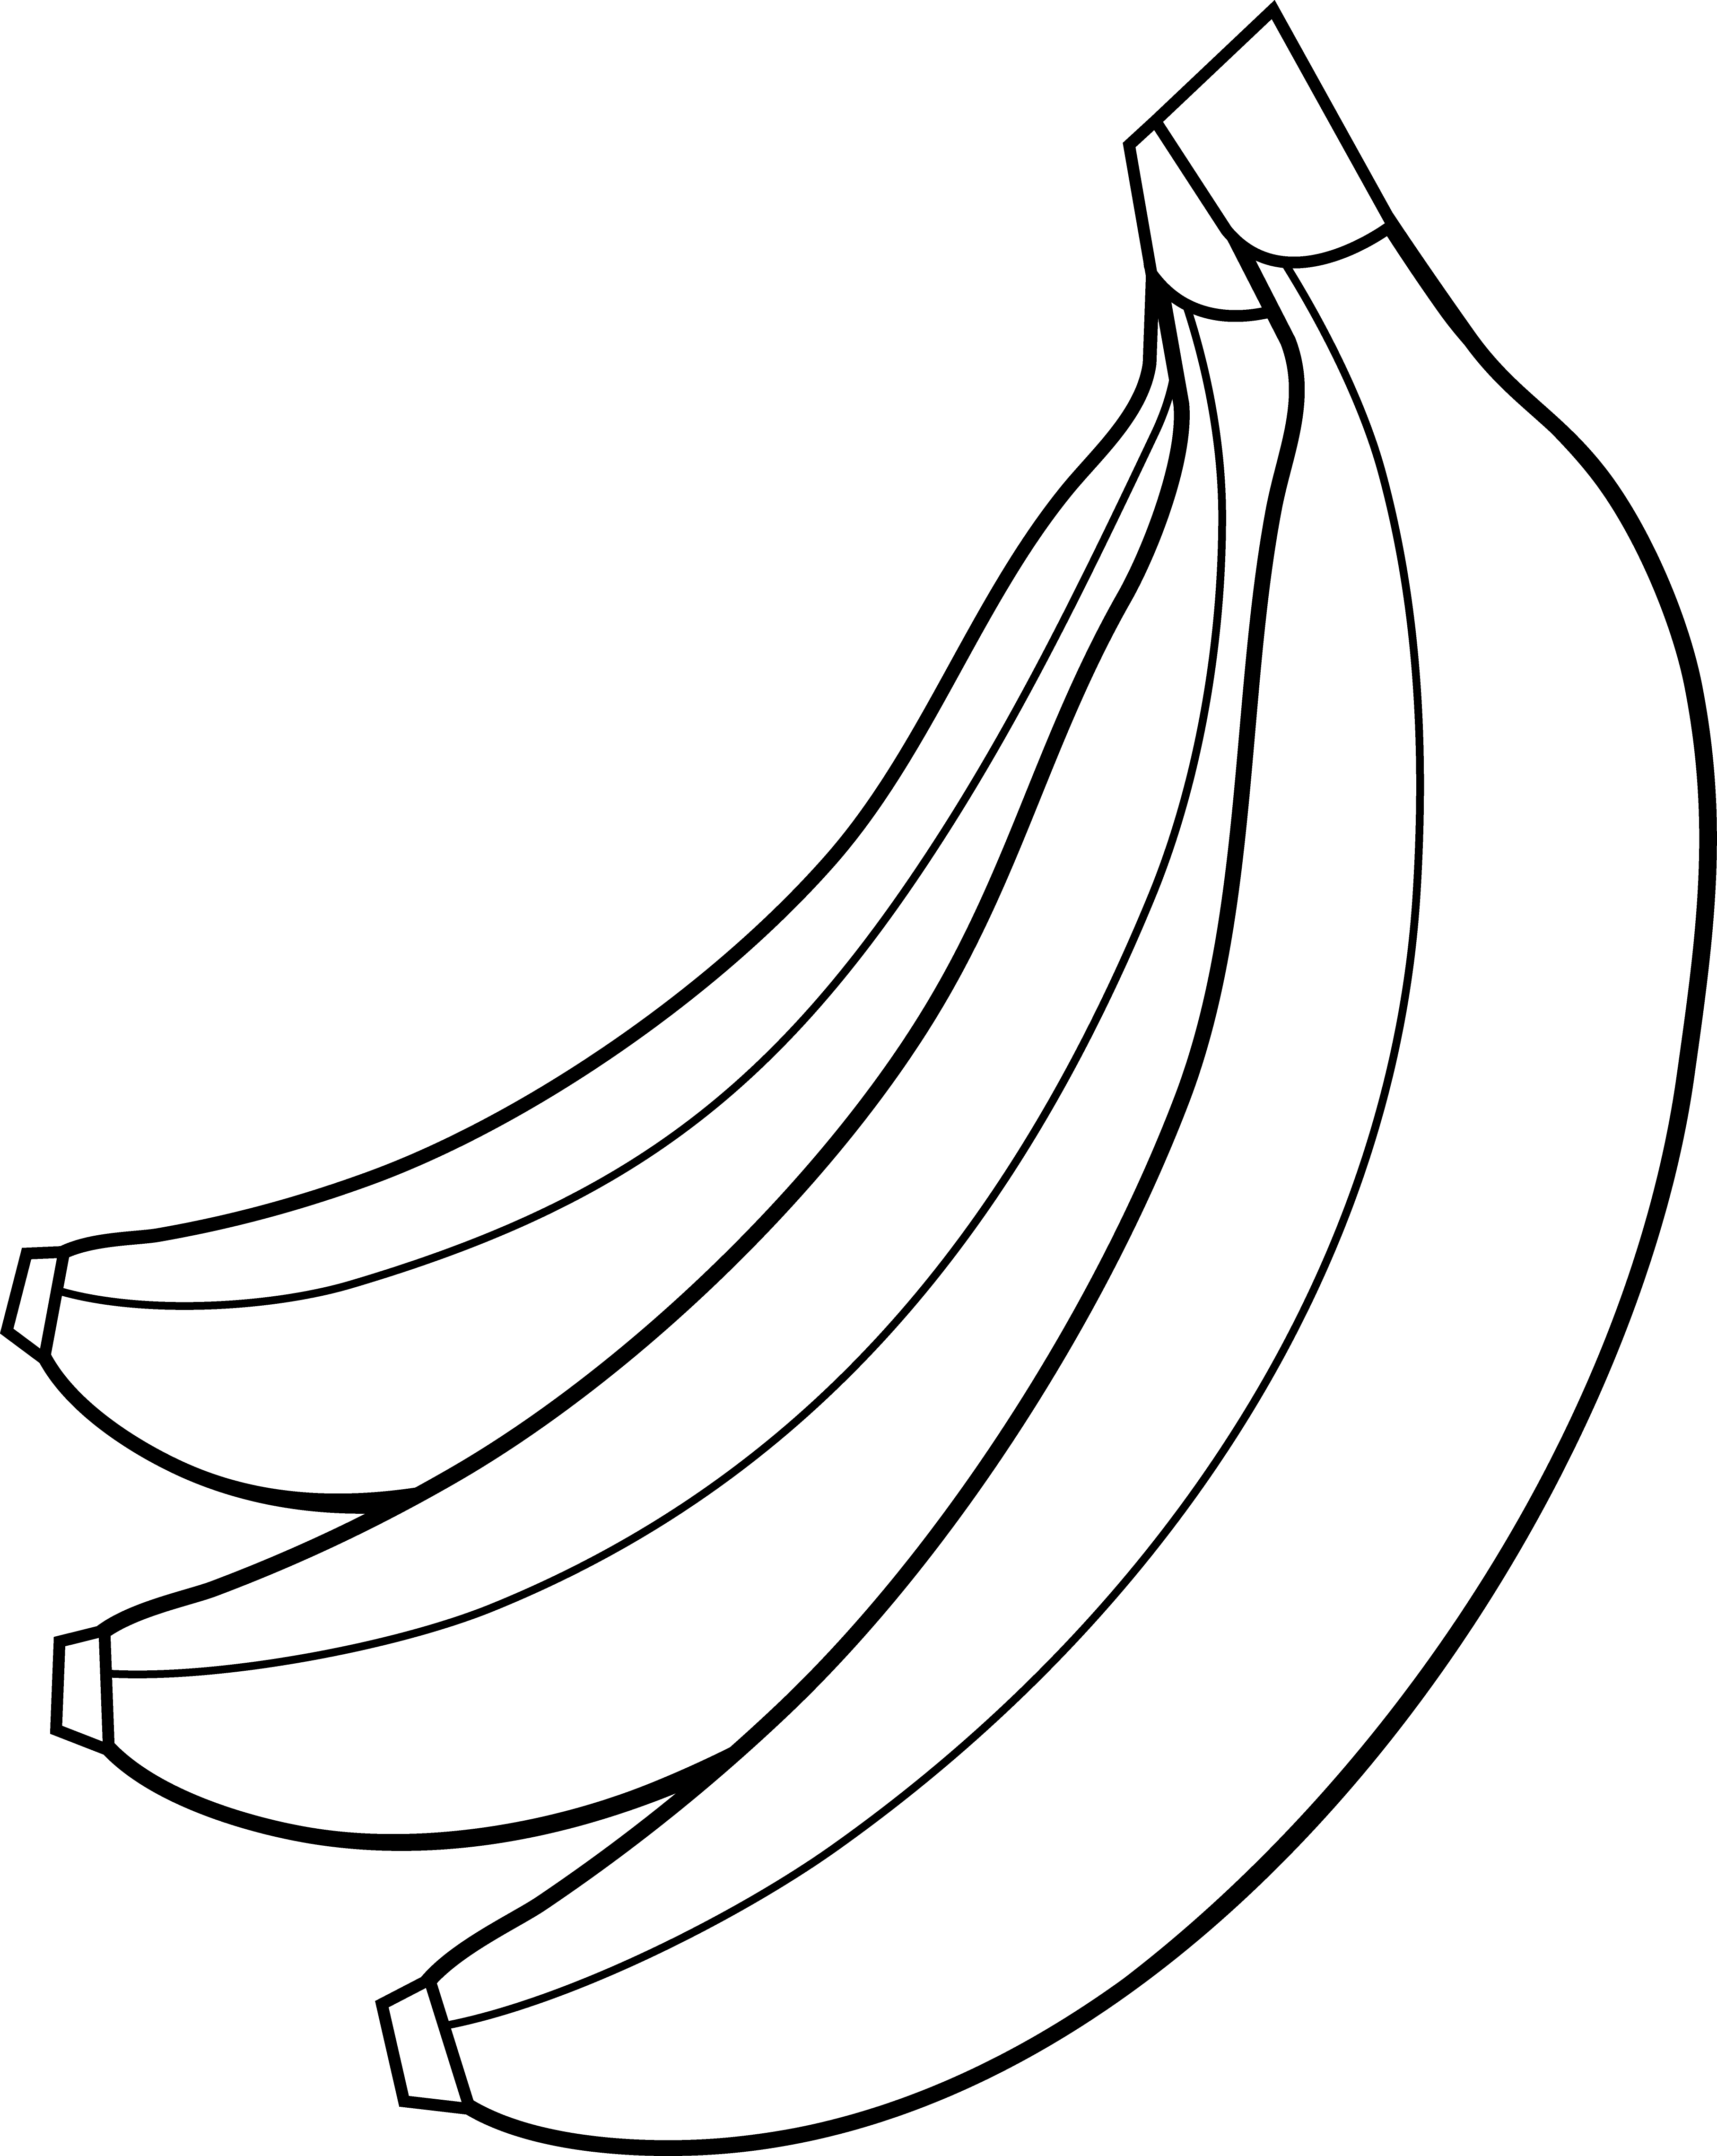 Banana Clipart Black And White   Clipart Panda   Free Clipart Images